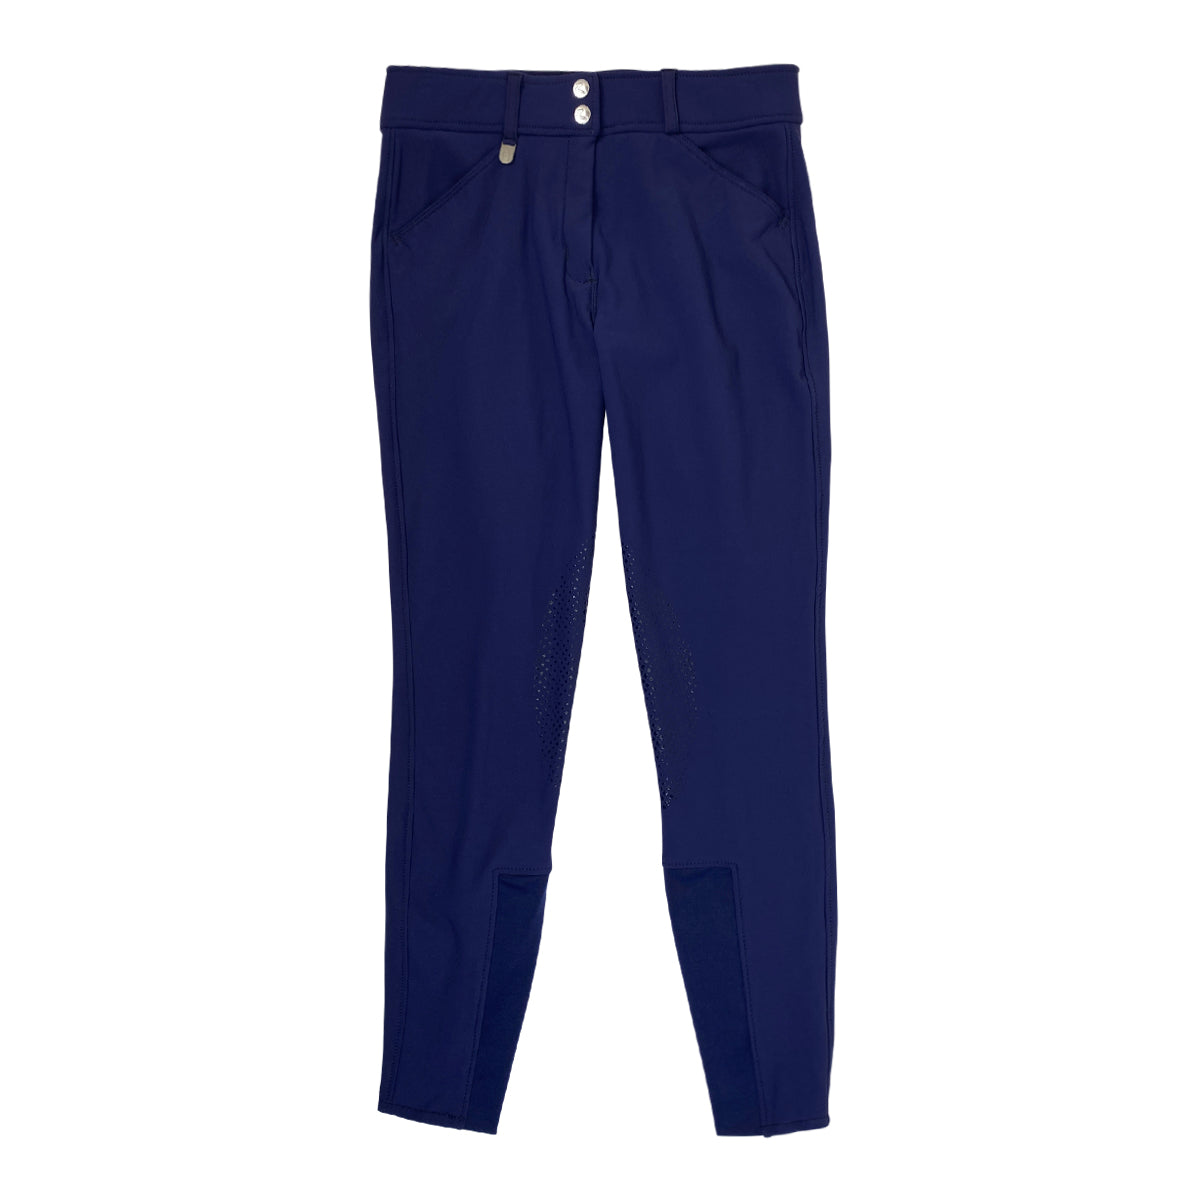 Horze 'Grand Prix' Silicone Knee Patch Breeches in Navy